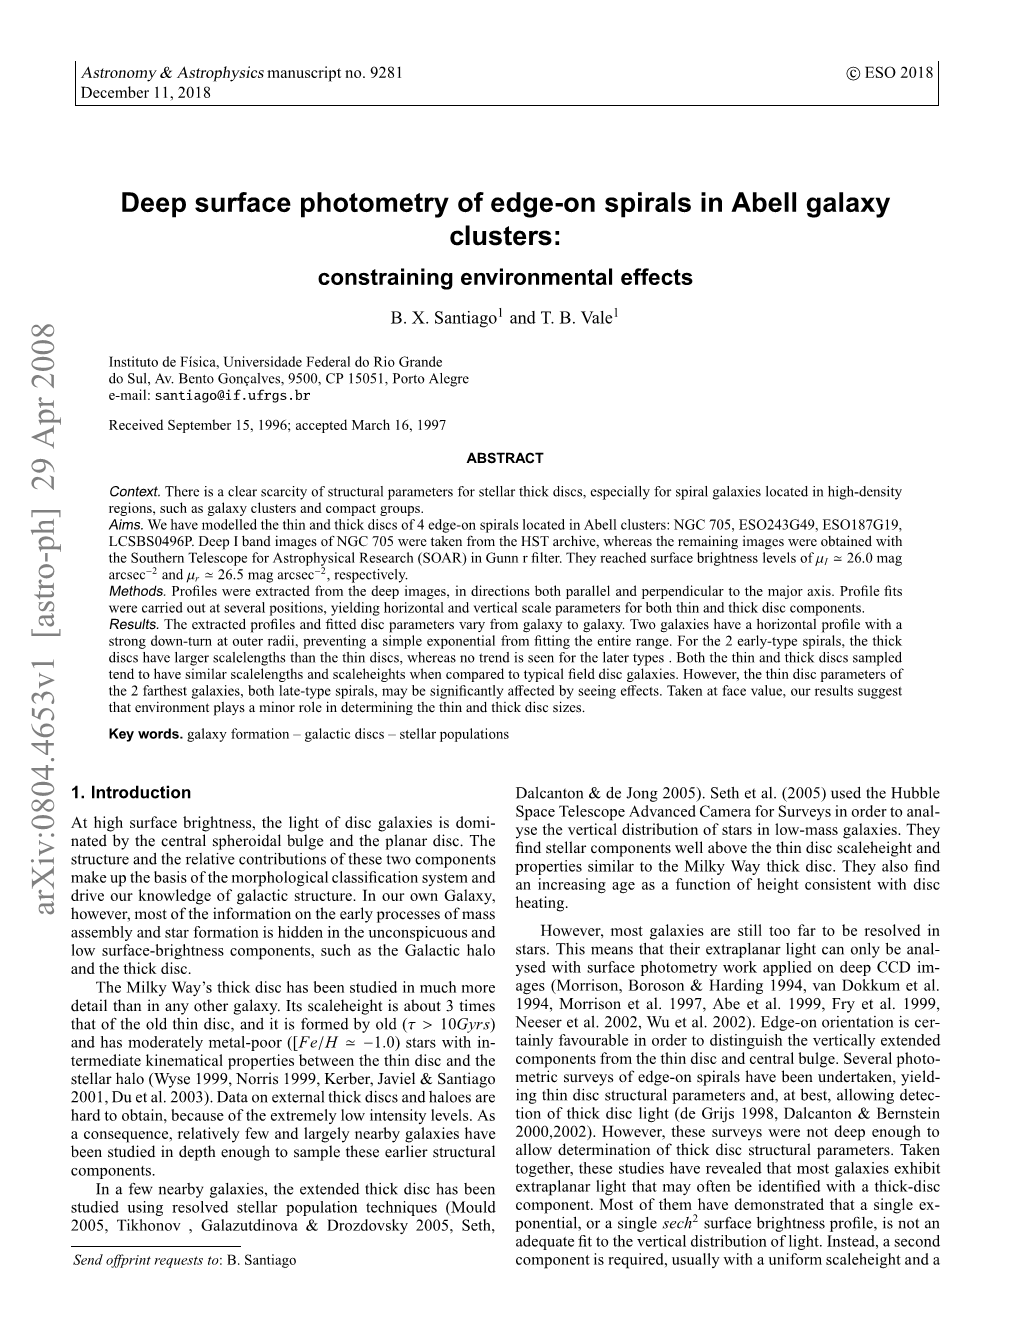 Deep Surface Photometry of Edge-On Spirals in Abell Galaxy Clusters